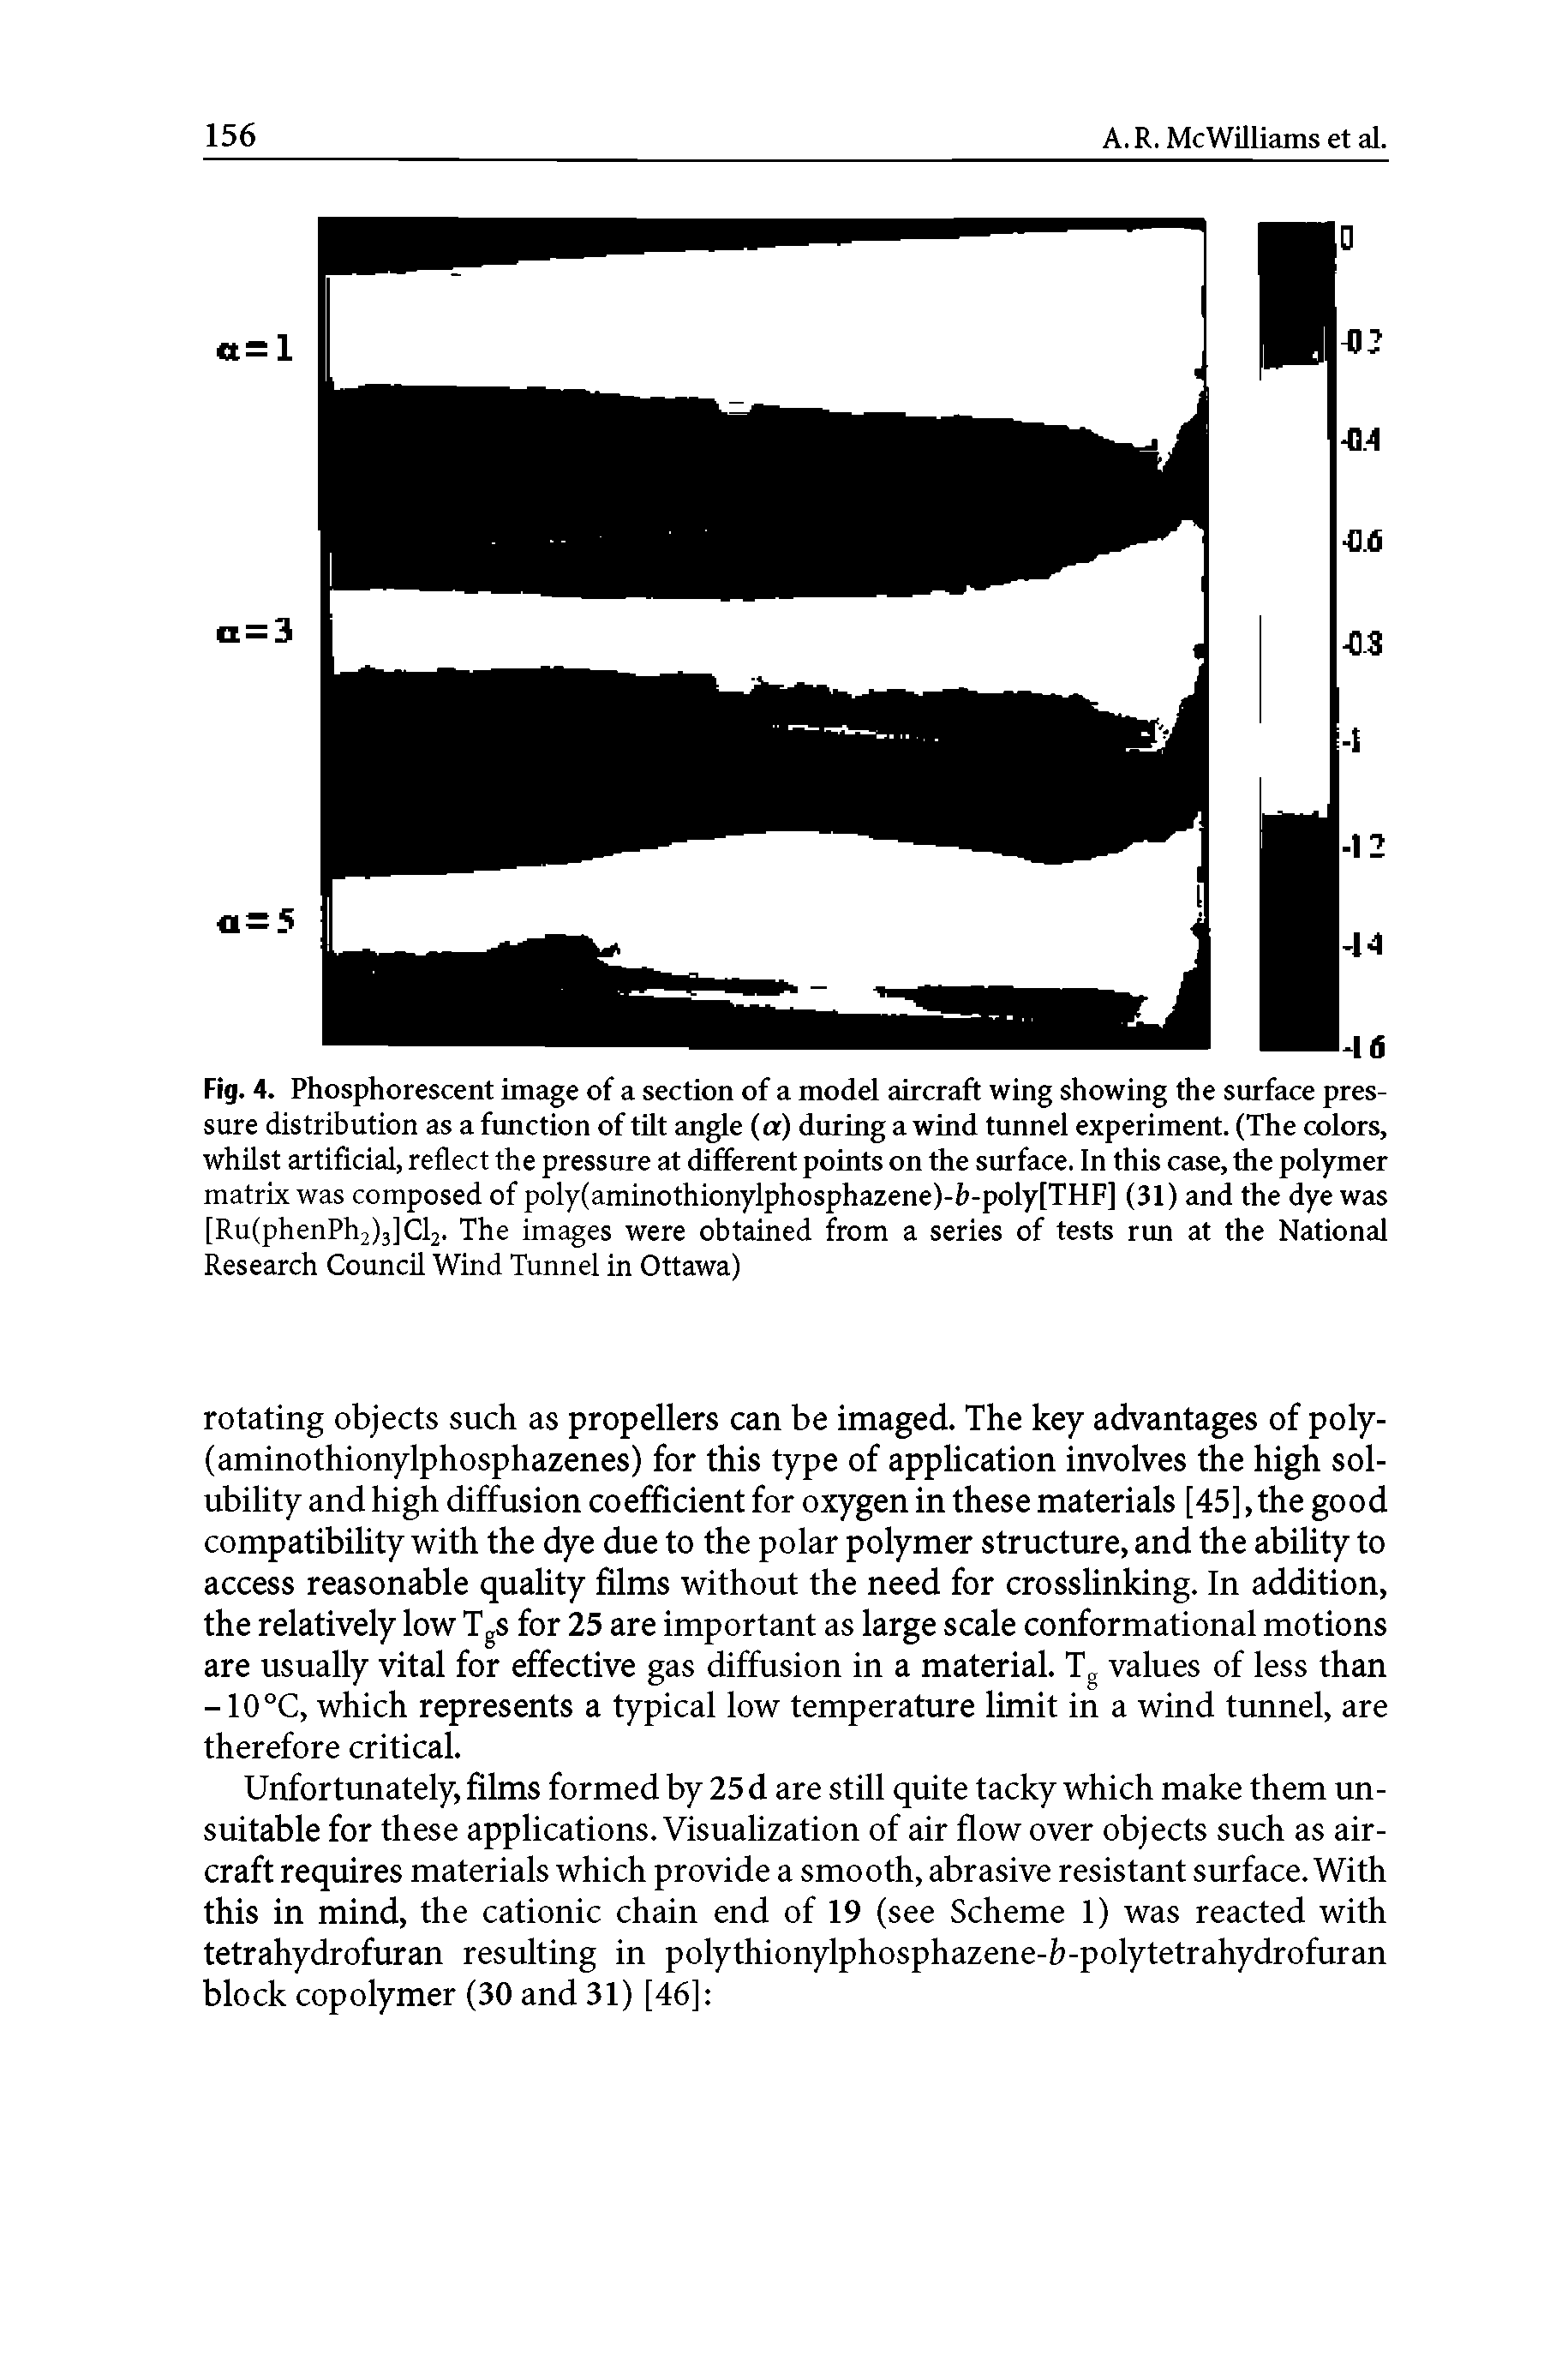 Fig. 4. Phosphorescent image of a section of a model aircraft wing showing the surface pressure distribution as a function of tilt angle (a) during a wind tunnel experiment. (The colors, whilst artificial, reflect the pressure at different points on the surface. In this case, the polymer matrix was composed of poly(aminothionylphosphazene)-b-poly[THF] (31) and the dye was [Ru(phenPh2)3]Cl2. The images were obtained from a series of tests run at the National Research Council Wind Tunnel in Ottawa)...